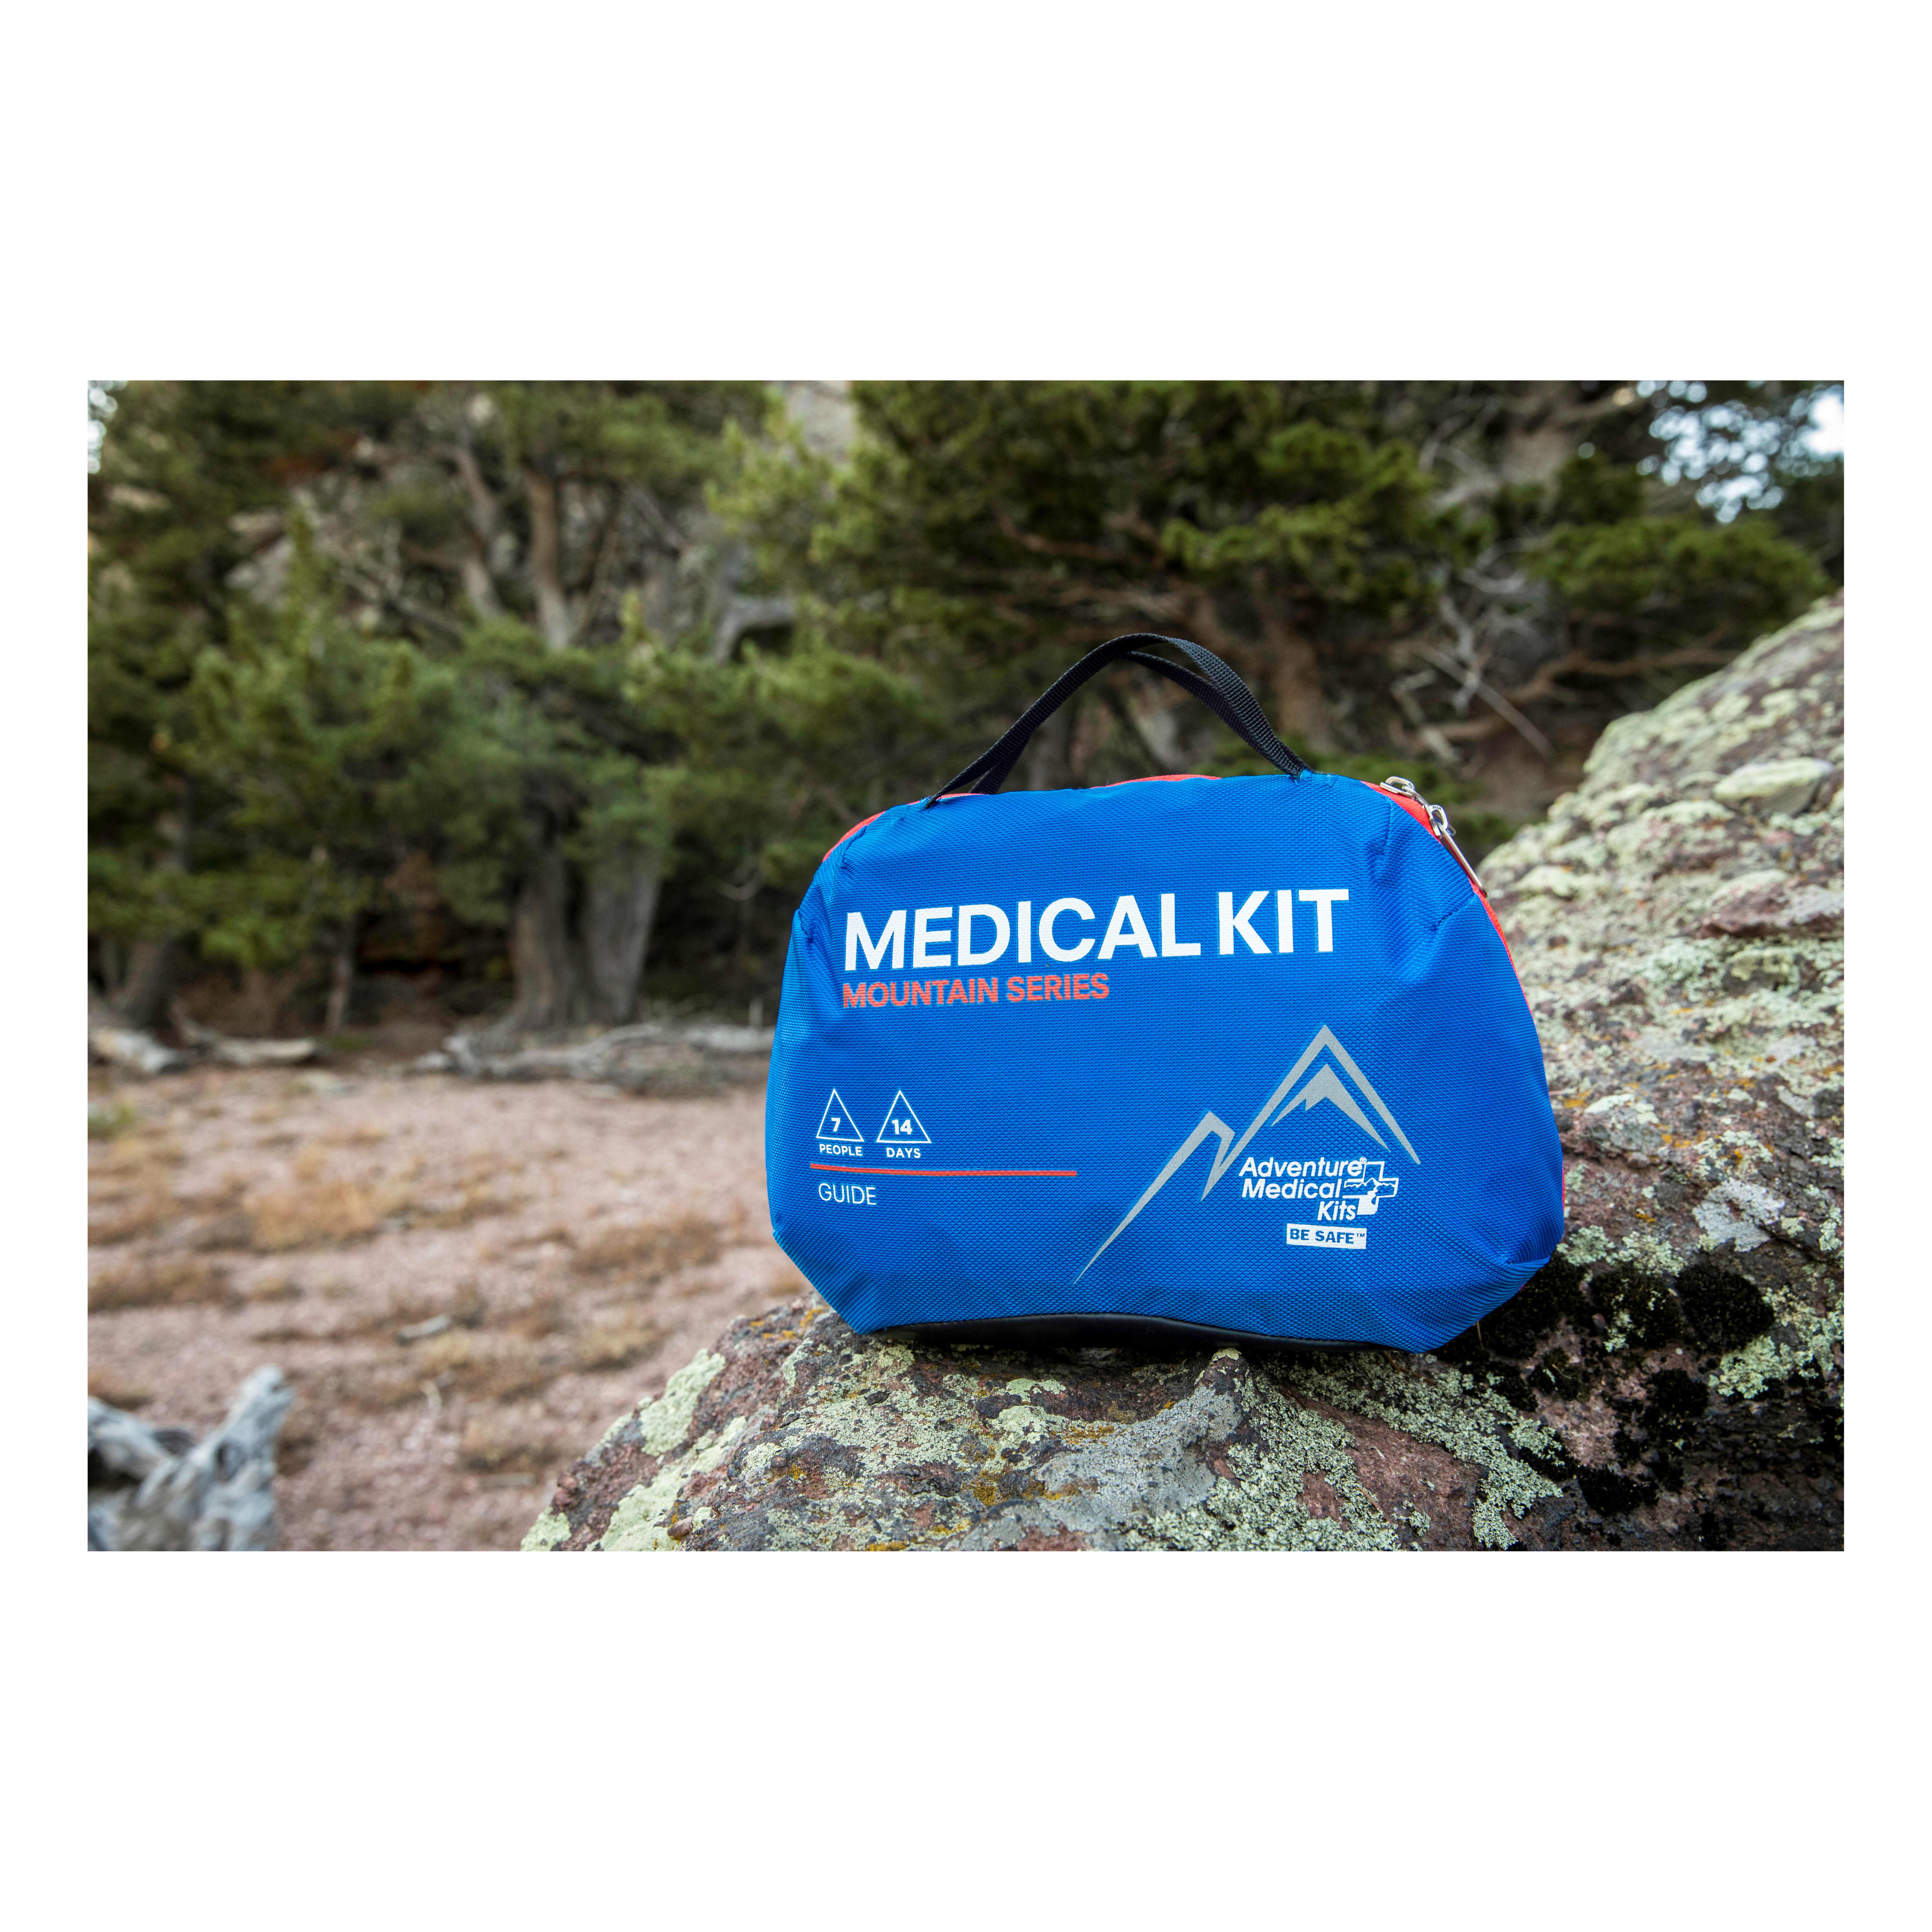 Adventure Medical Kits® Mountain Series Guide Medical Kit - In the Field